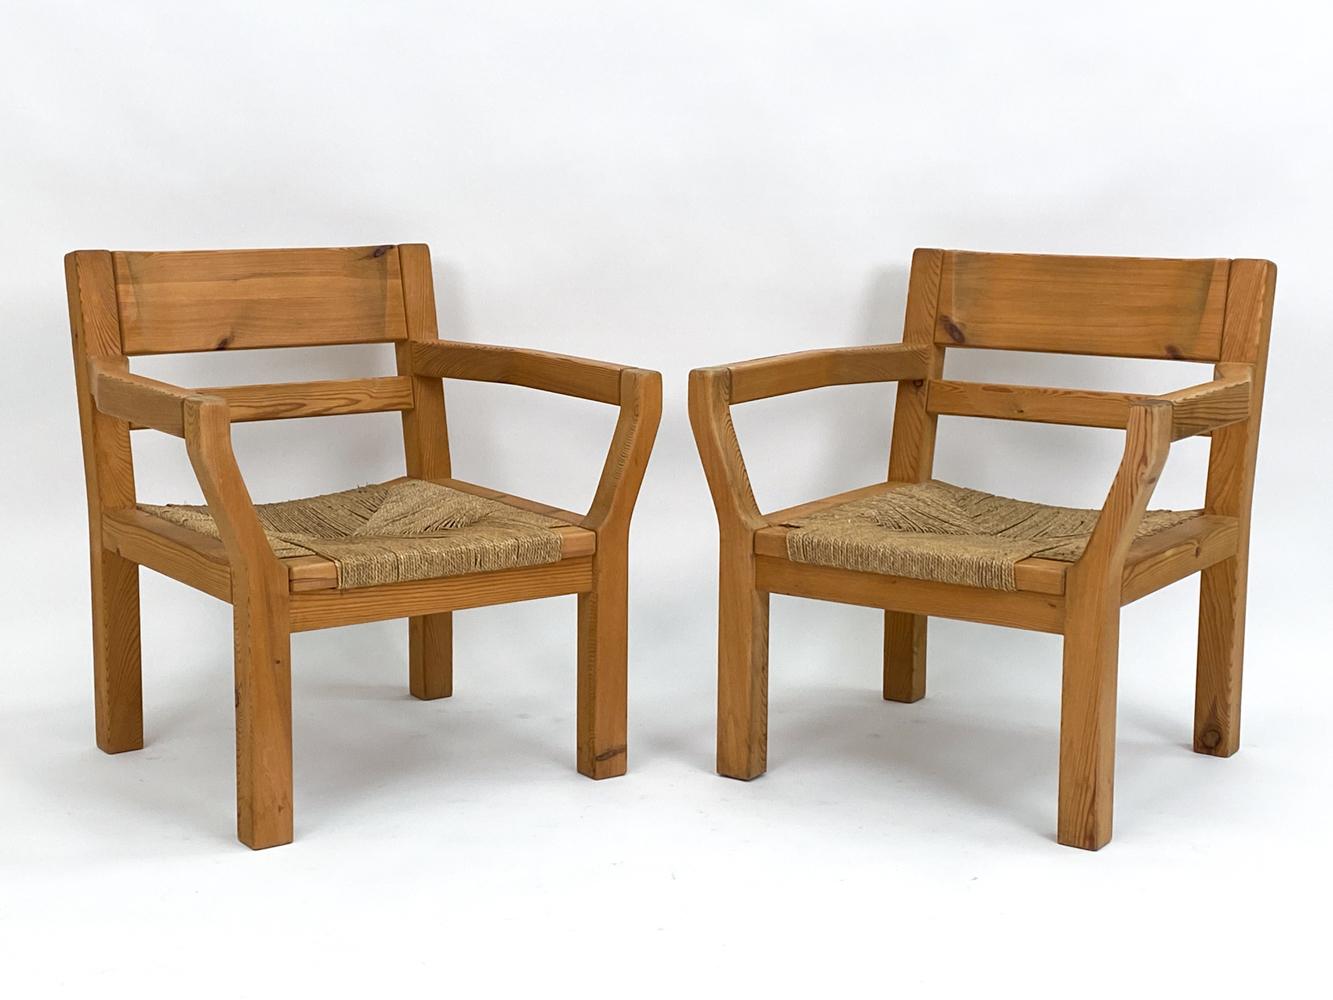 Scandinavian Modern Pair of Tage Poulsen Pine & Rush Seat Lounge Chairs, c. 1970's For Sale